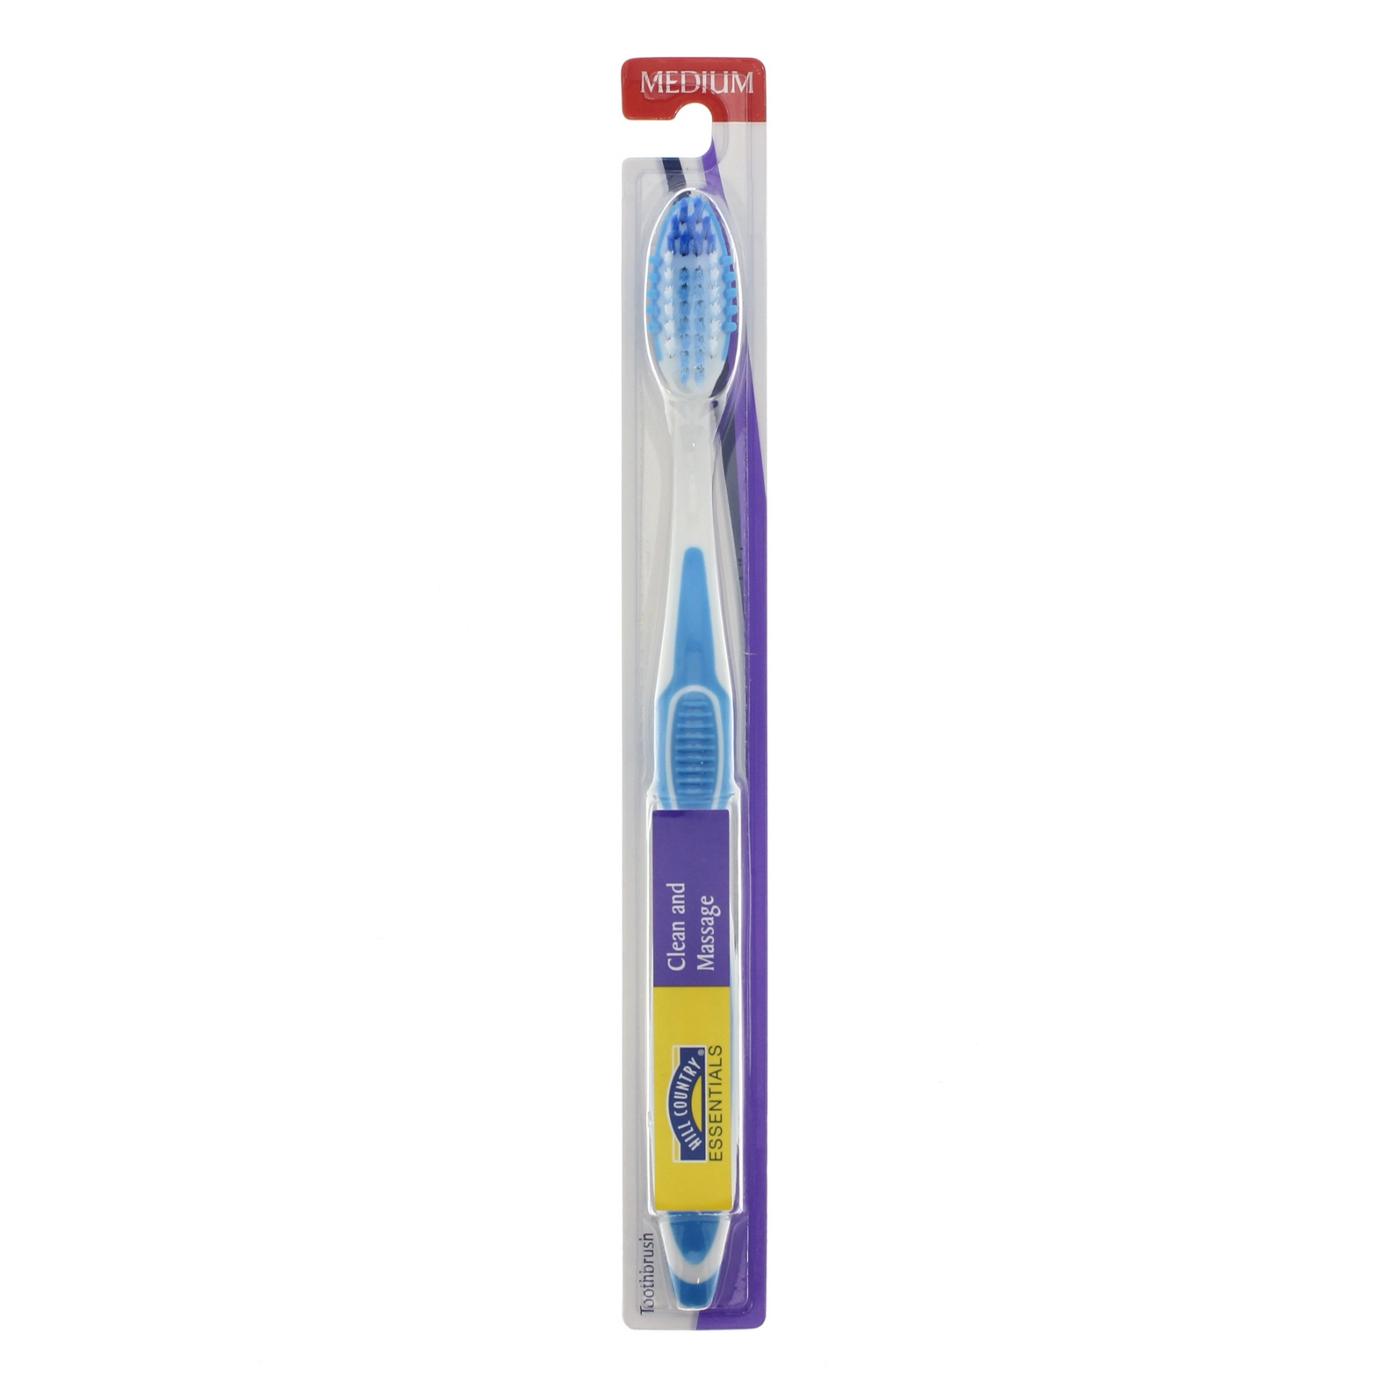 Hill Country Essentials Clean and Massage Medium Toothbrush - Colors May Vary; image 2 of 4